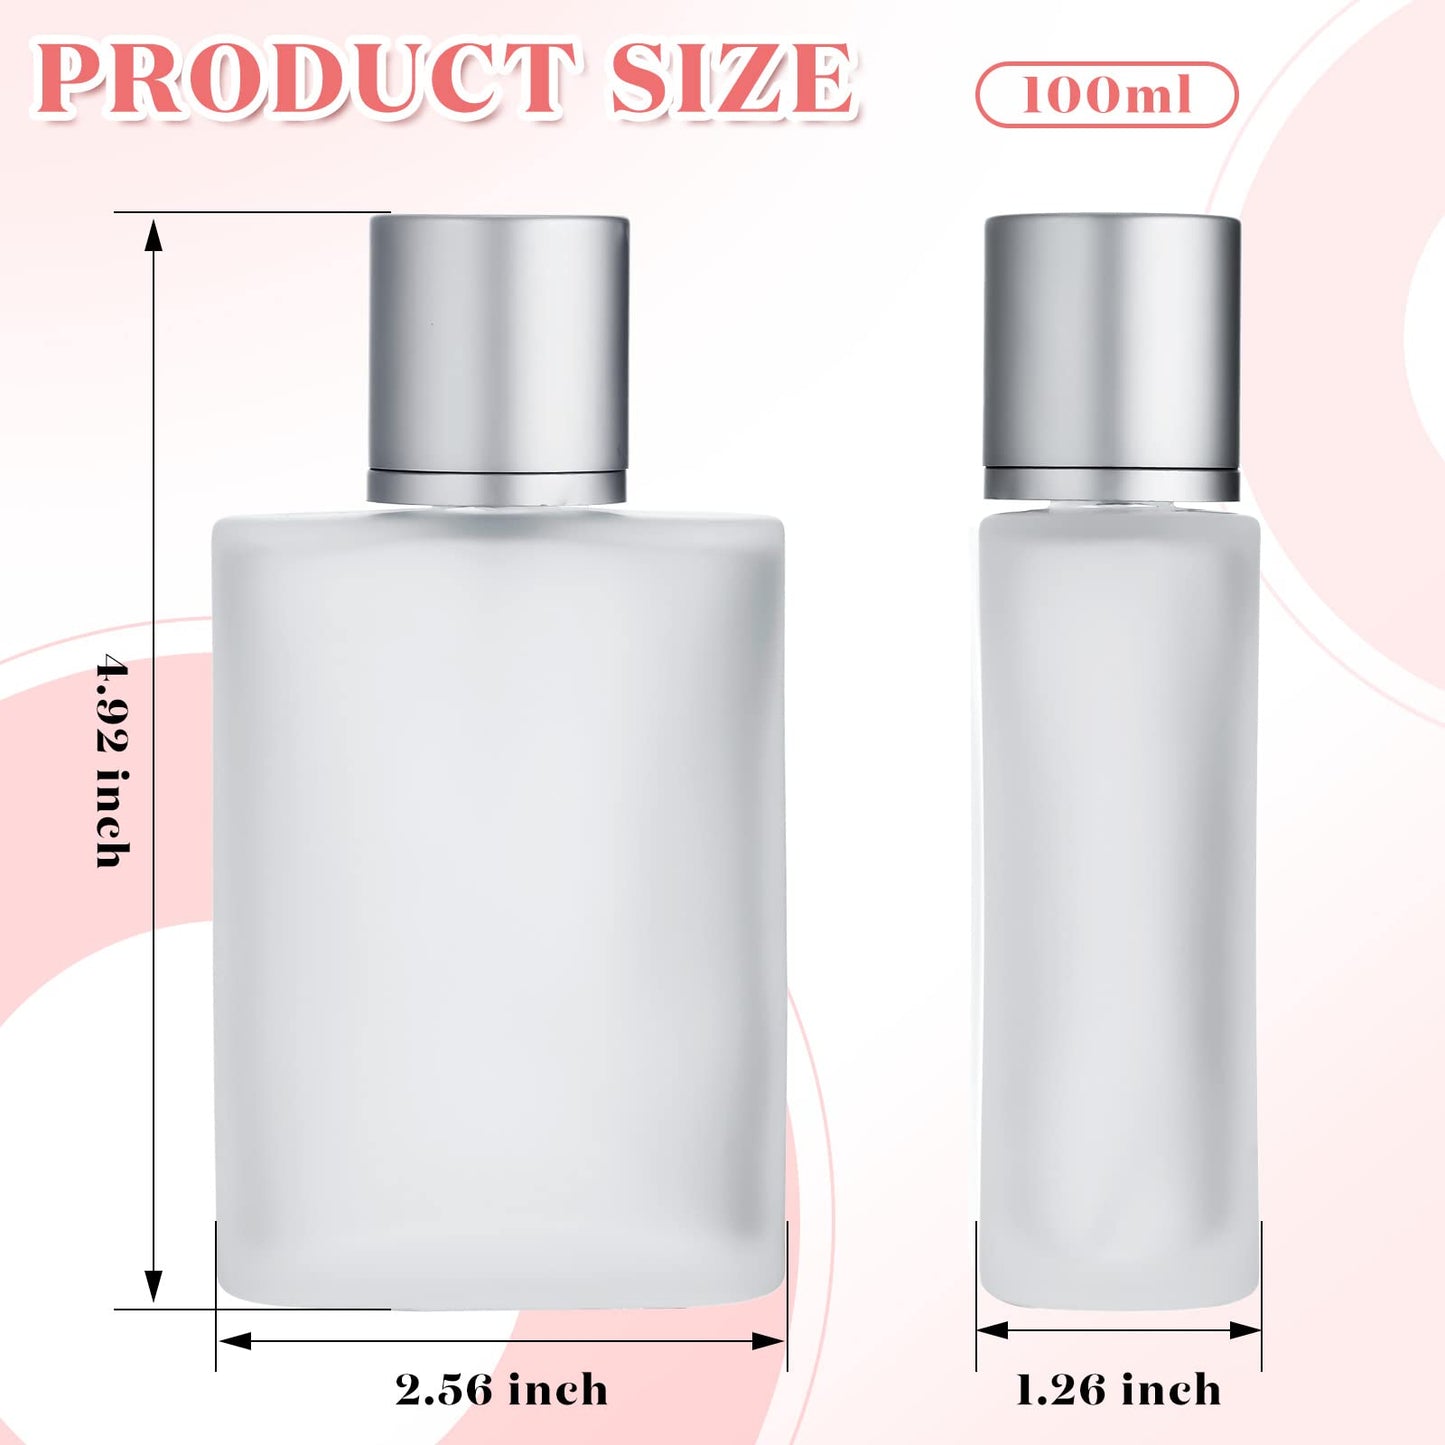 6 Pcs 100ml Frosted Glass Bottle Perfume Atomizer Refillable Spray Empty Perfume Bottles Fine Mist Atomizer Cosmetic Container for Travel (Silver)